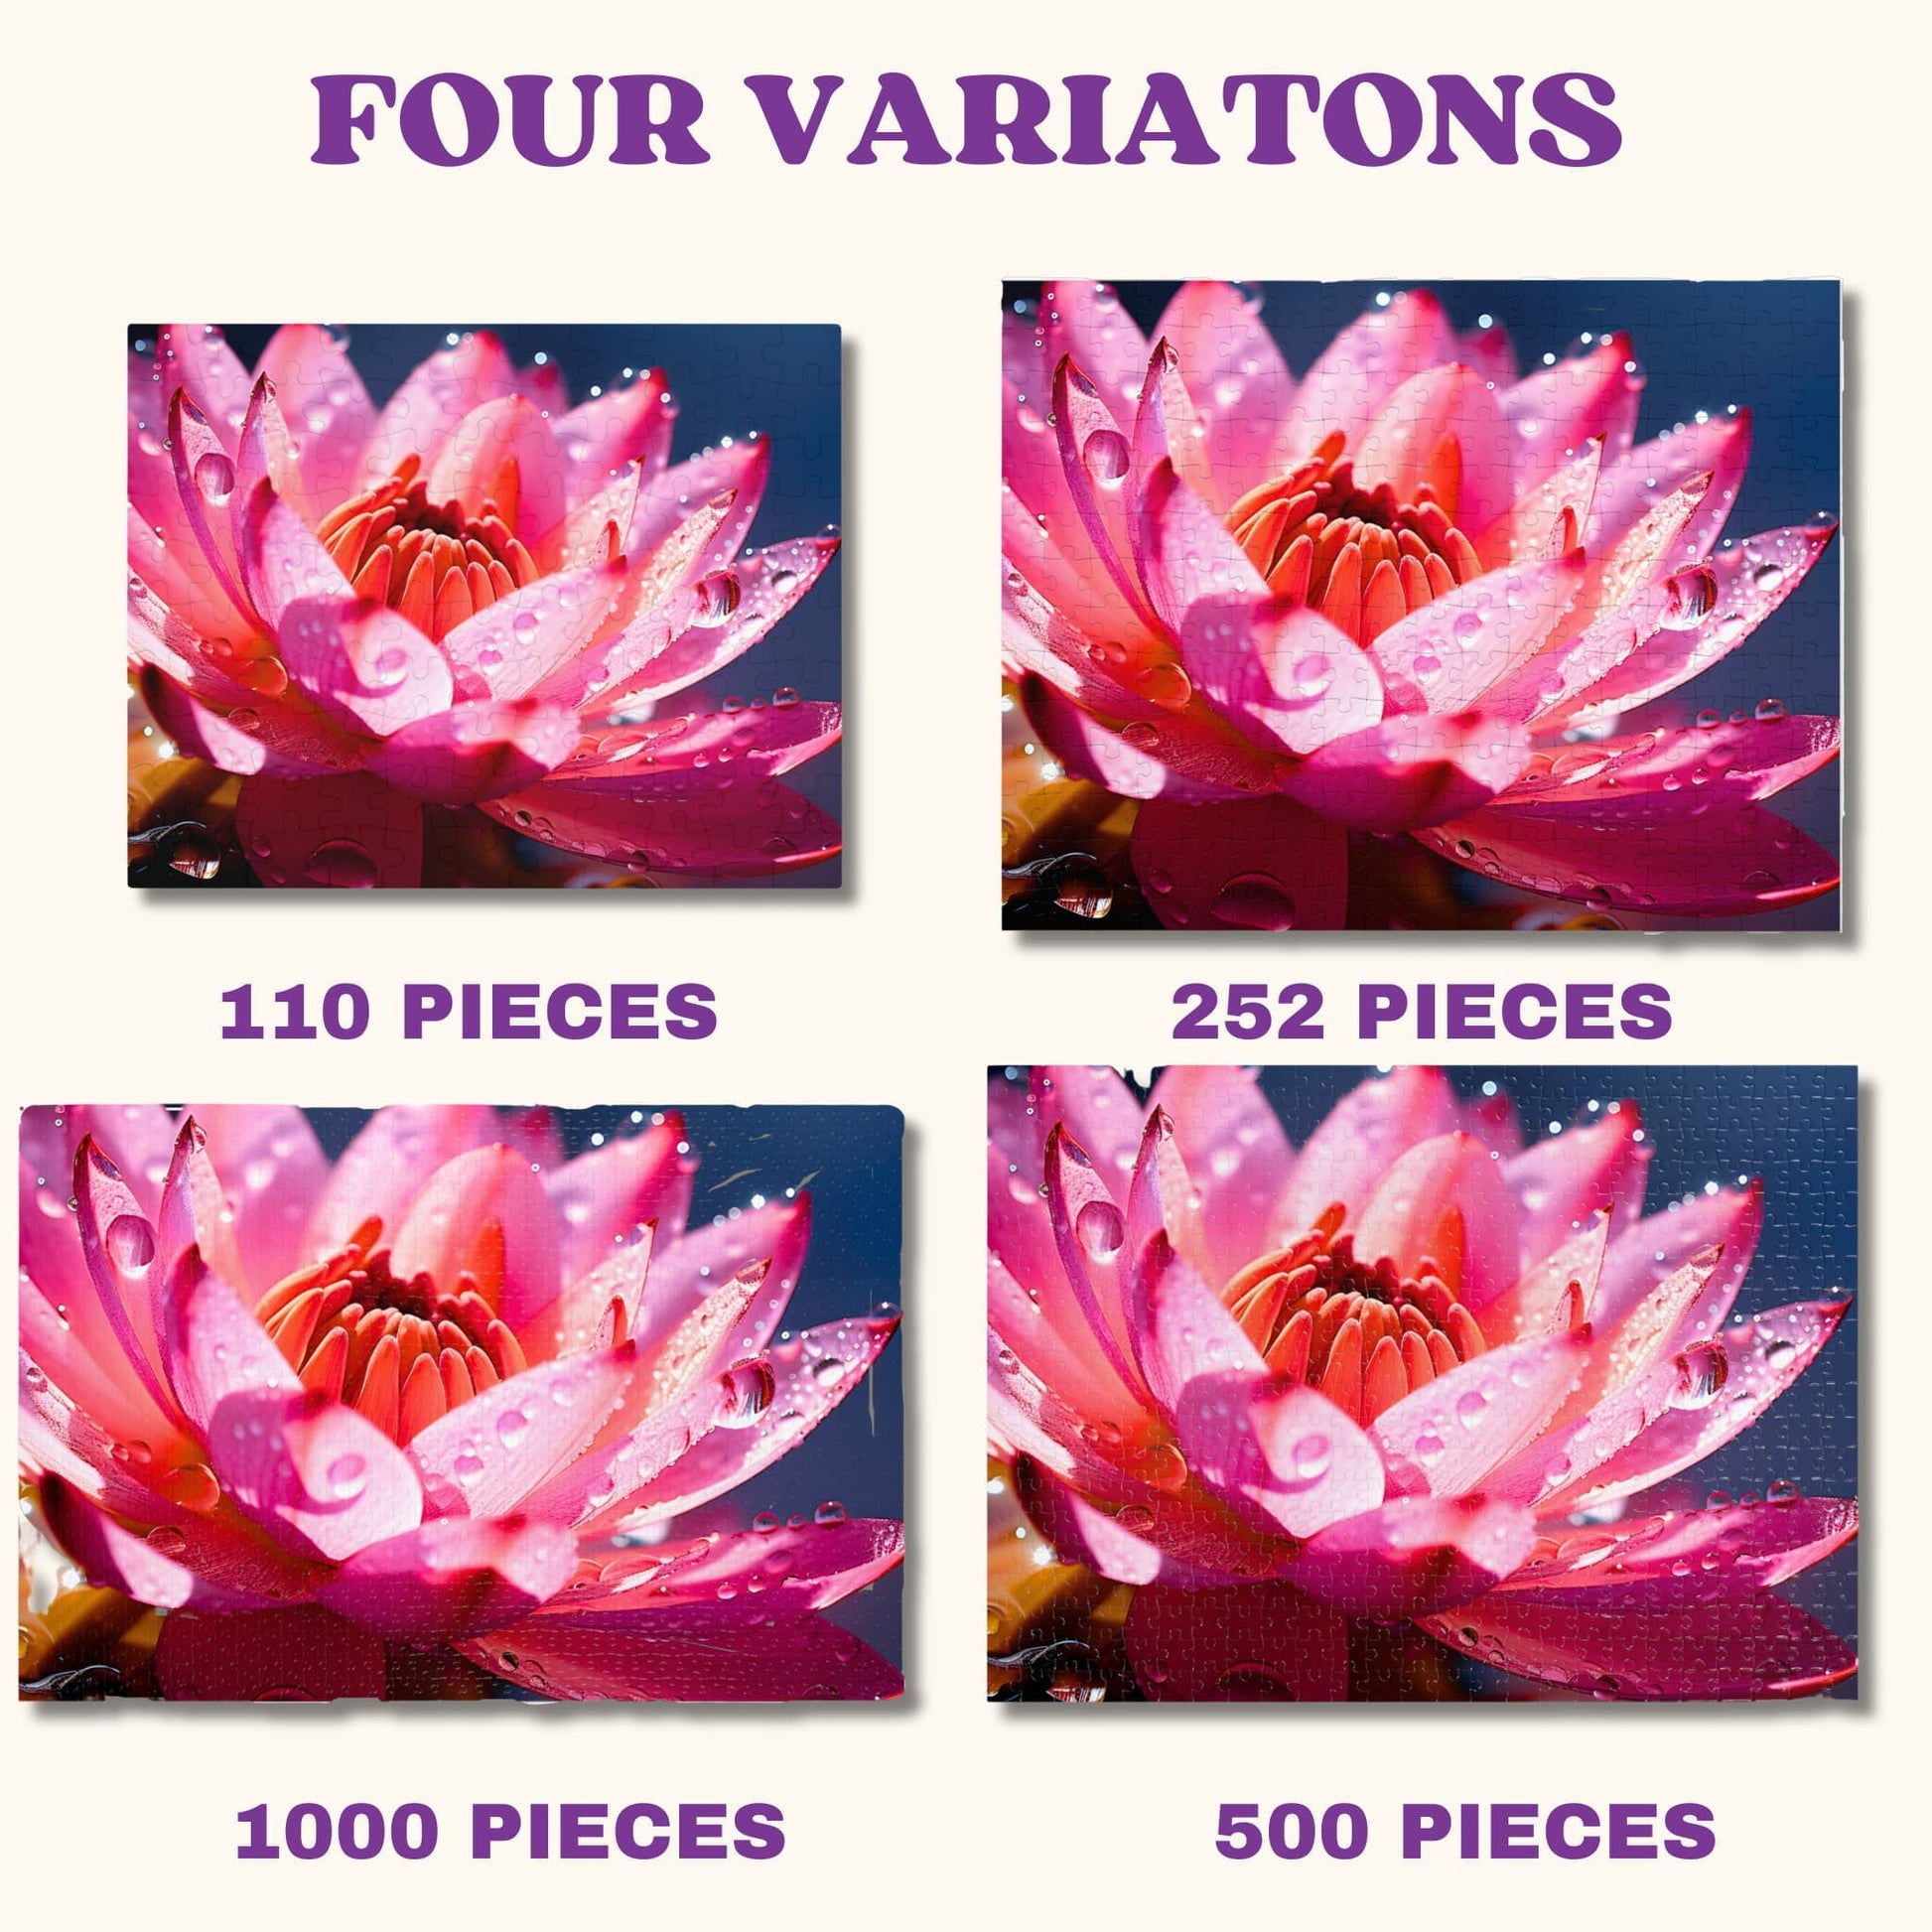 Array of available puzzle variations, showcasing different stunning designs of the pink lotus flower and nature-themed puzzles in 1000 pieces.